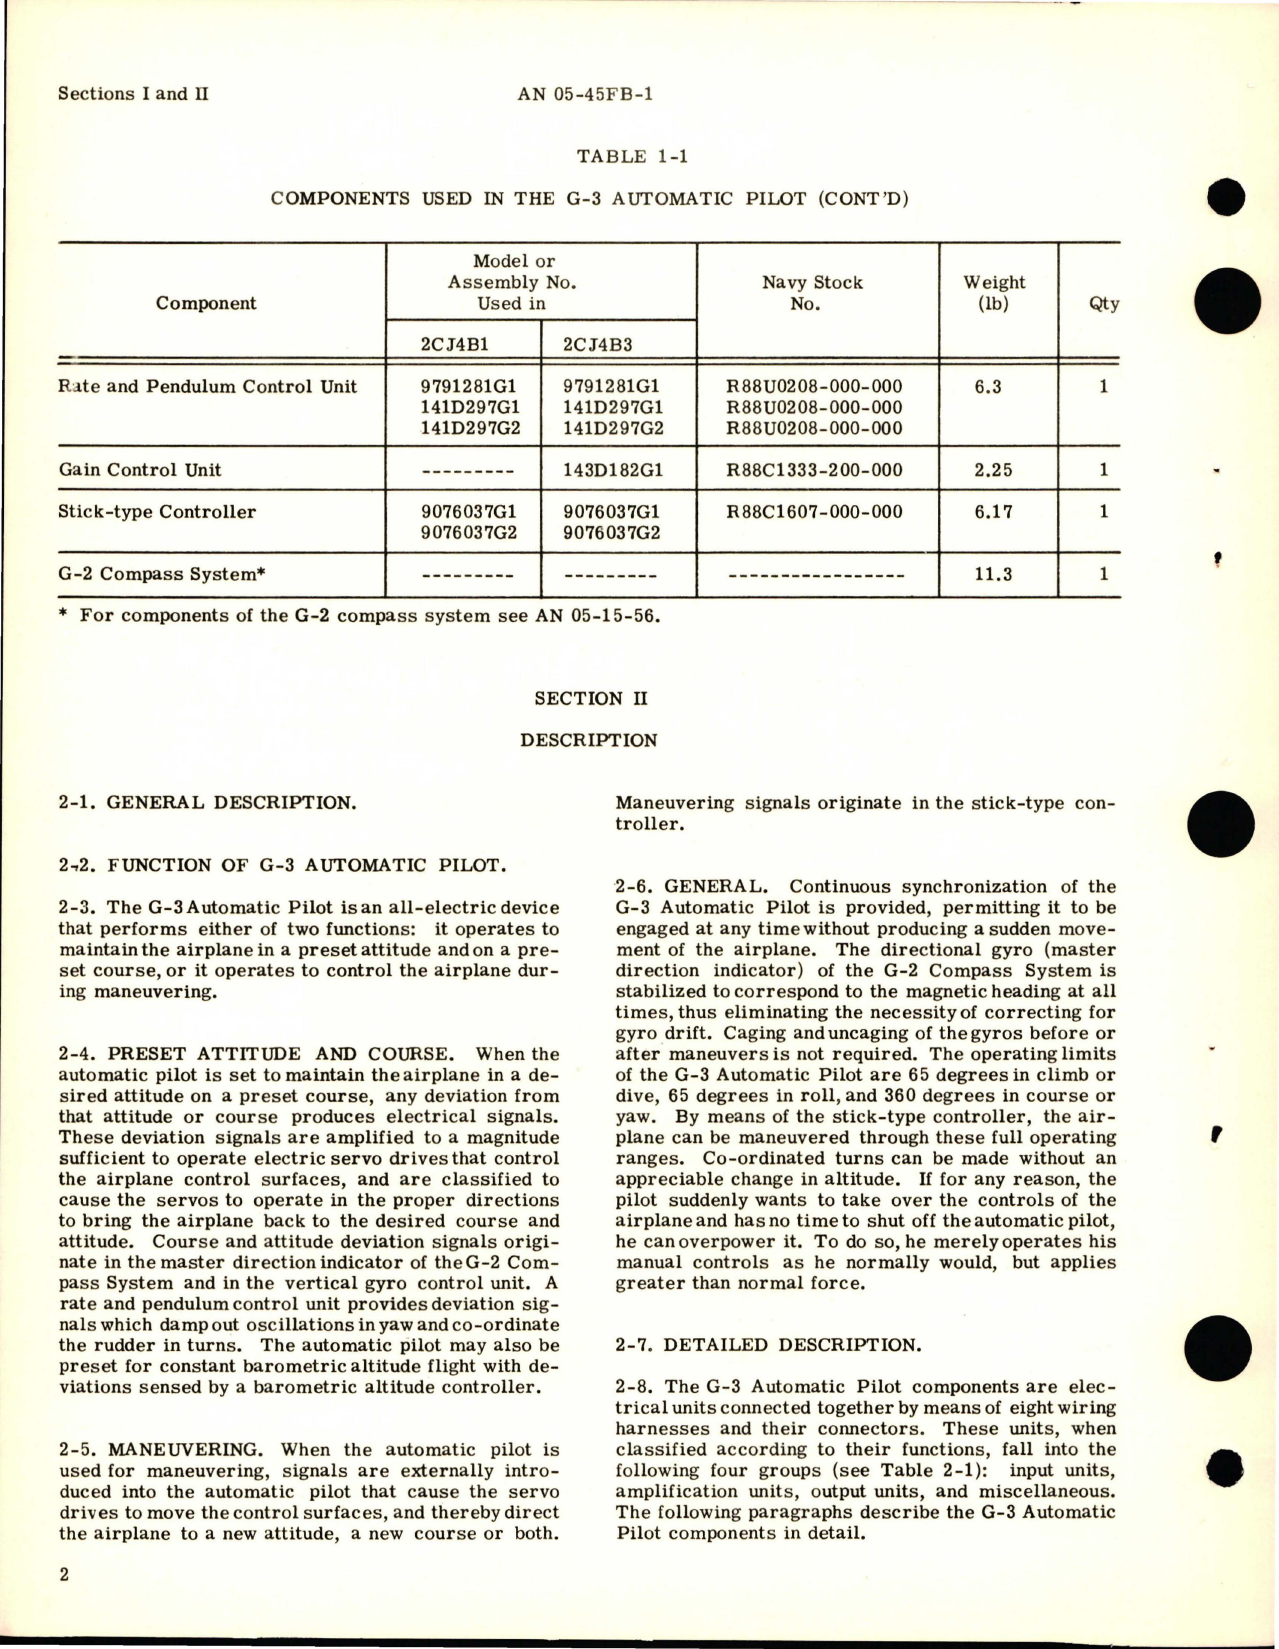 Sample page 8 from AirCorps Library document: Operation and Service Instructions for G-3 Automatic Pilot - Model 2CJ4B1 and 2CJ4B3 